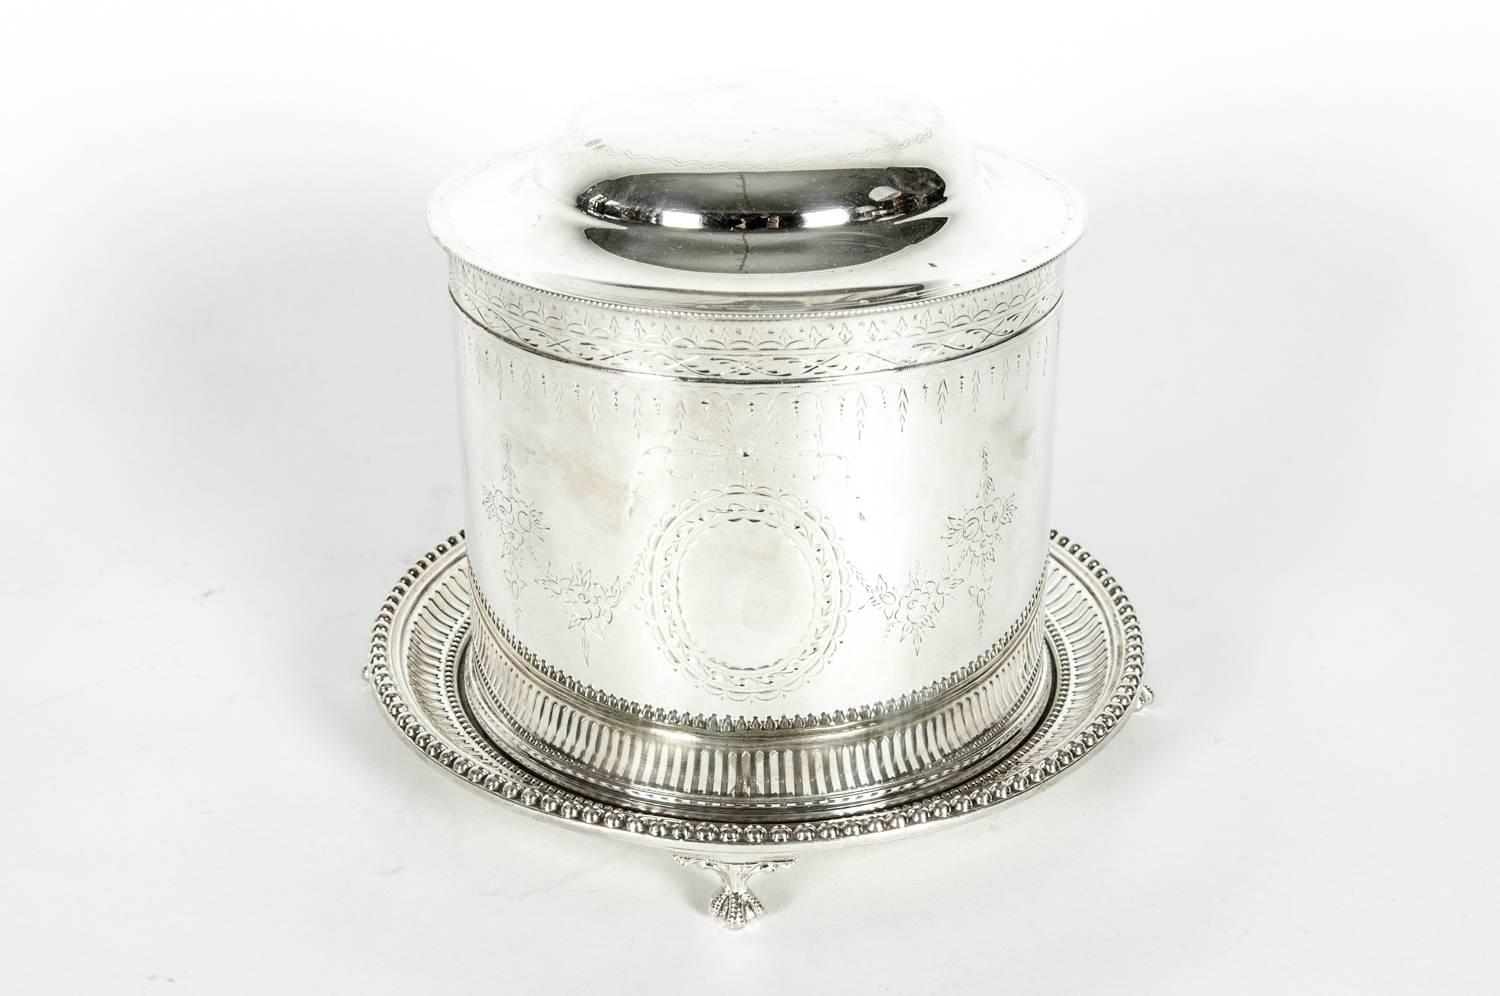 Beautiful English silver plate covered biscuit box / tea caddy with attached footed gallery tray and exterior design details. The Caddy is in great vintage condition. Minor wear consistent with age / use. Maker's mark undersigned. The caddy stands